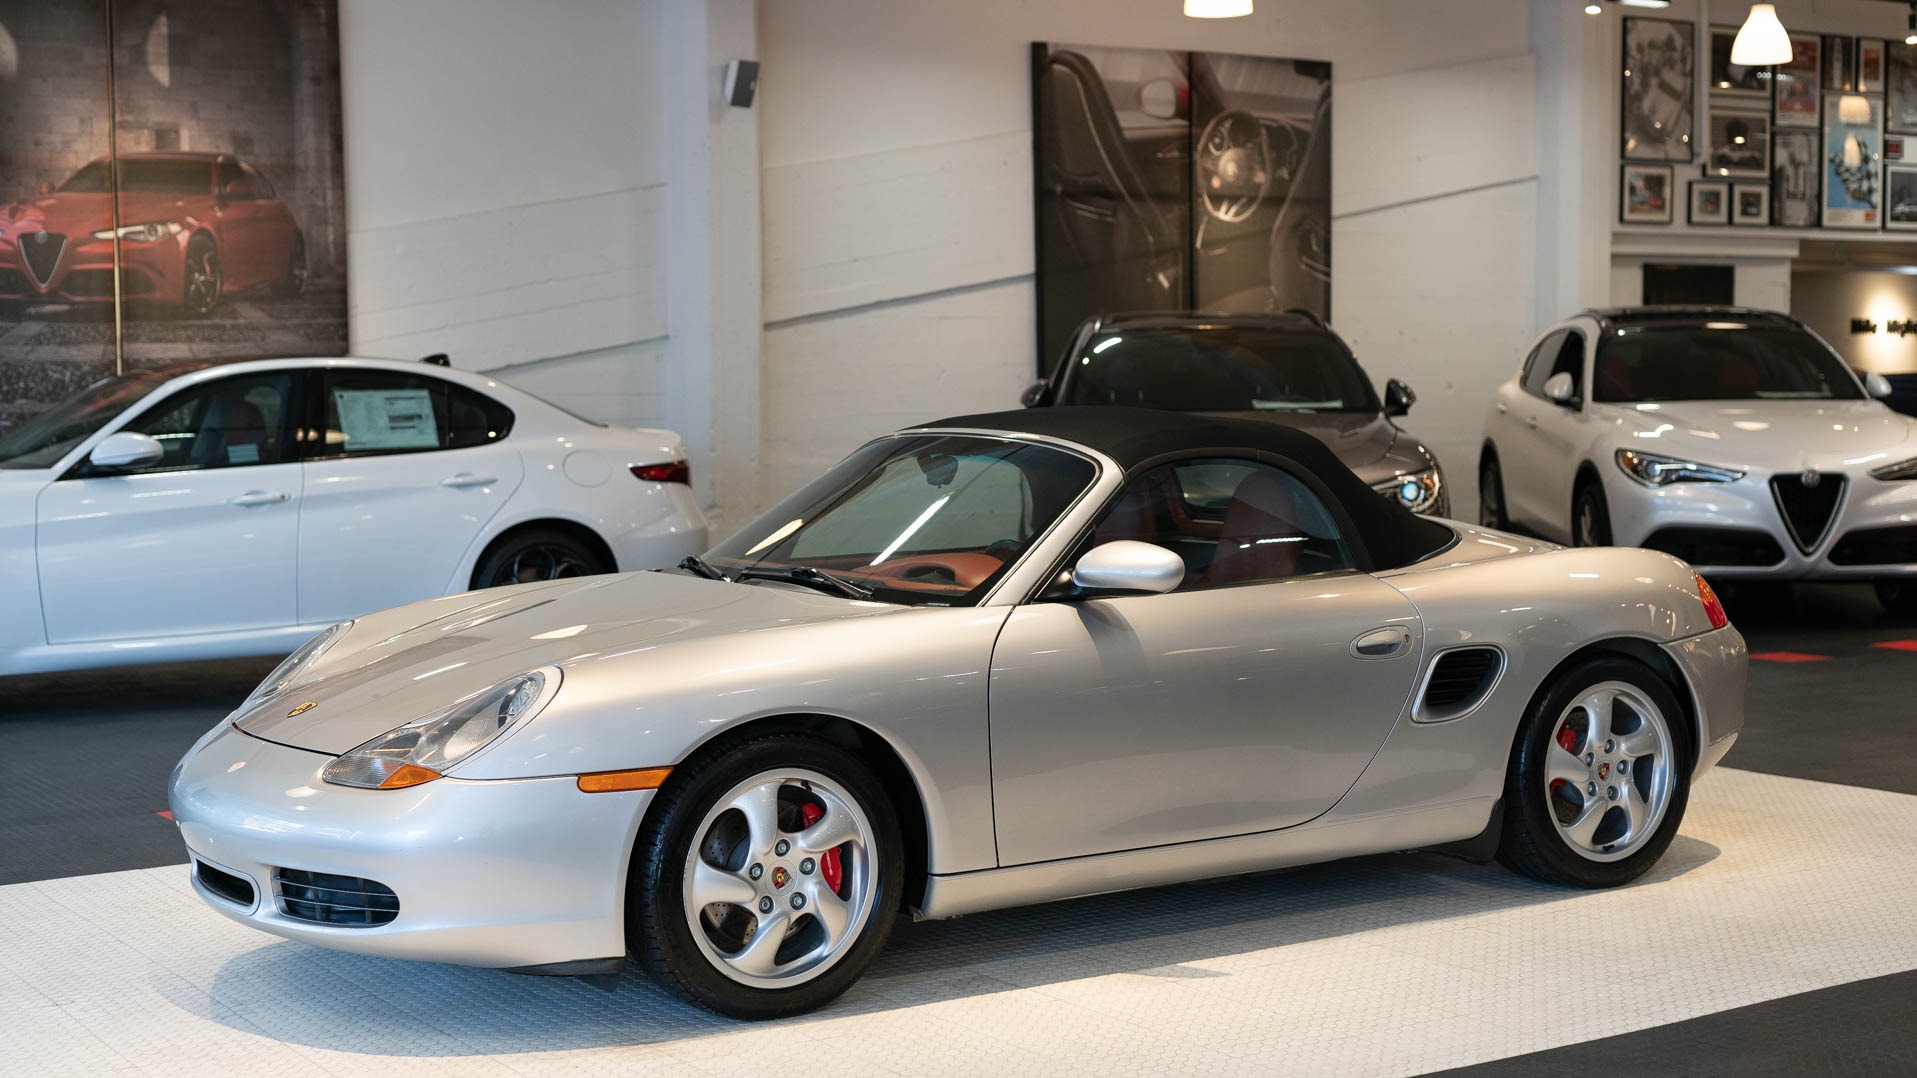 Used 2000 Porsche Boxster S For Sale 13900 Cars